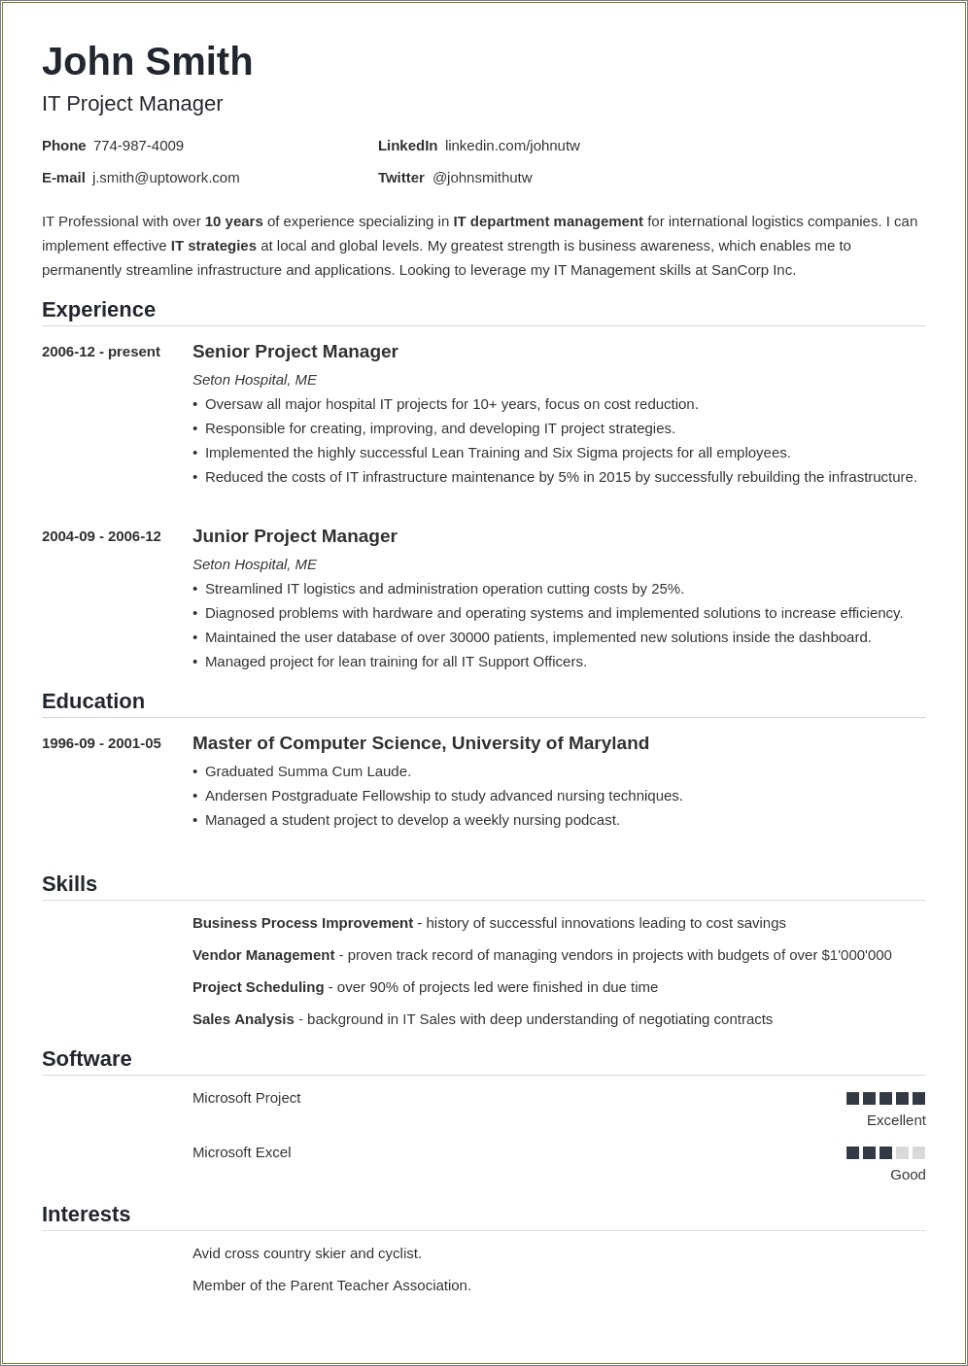 Do You Have Purchase Order Experience On Resume